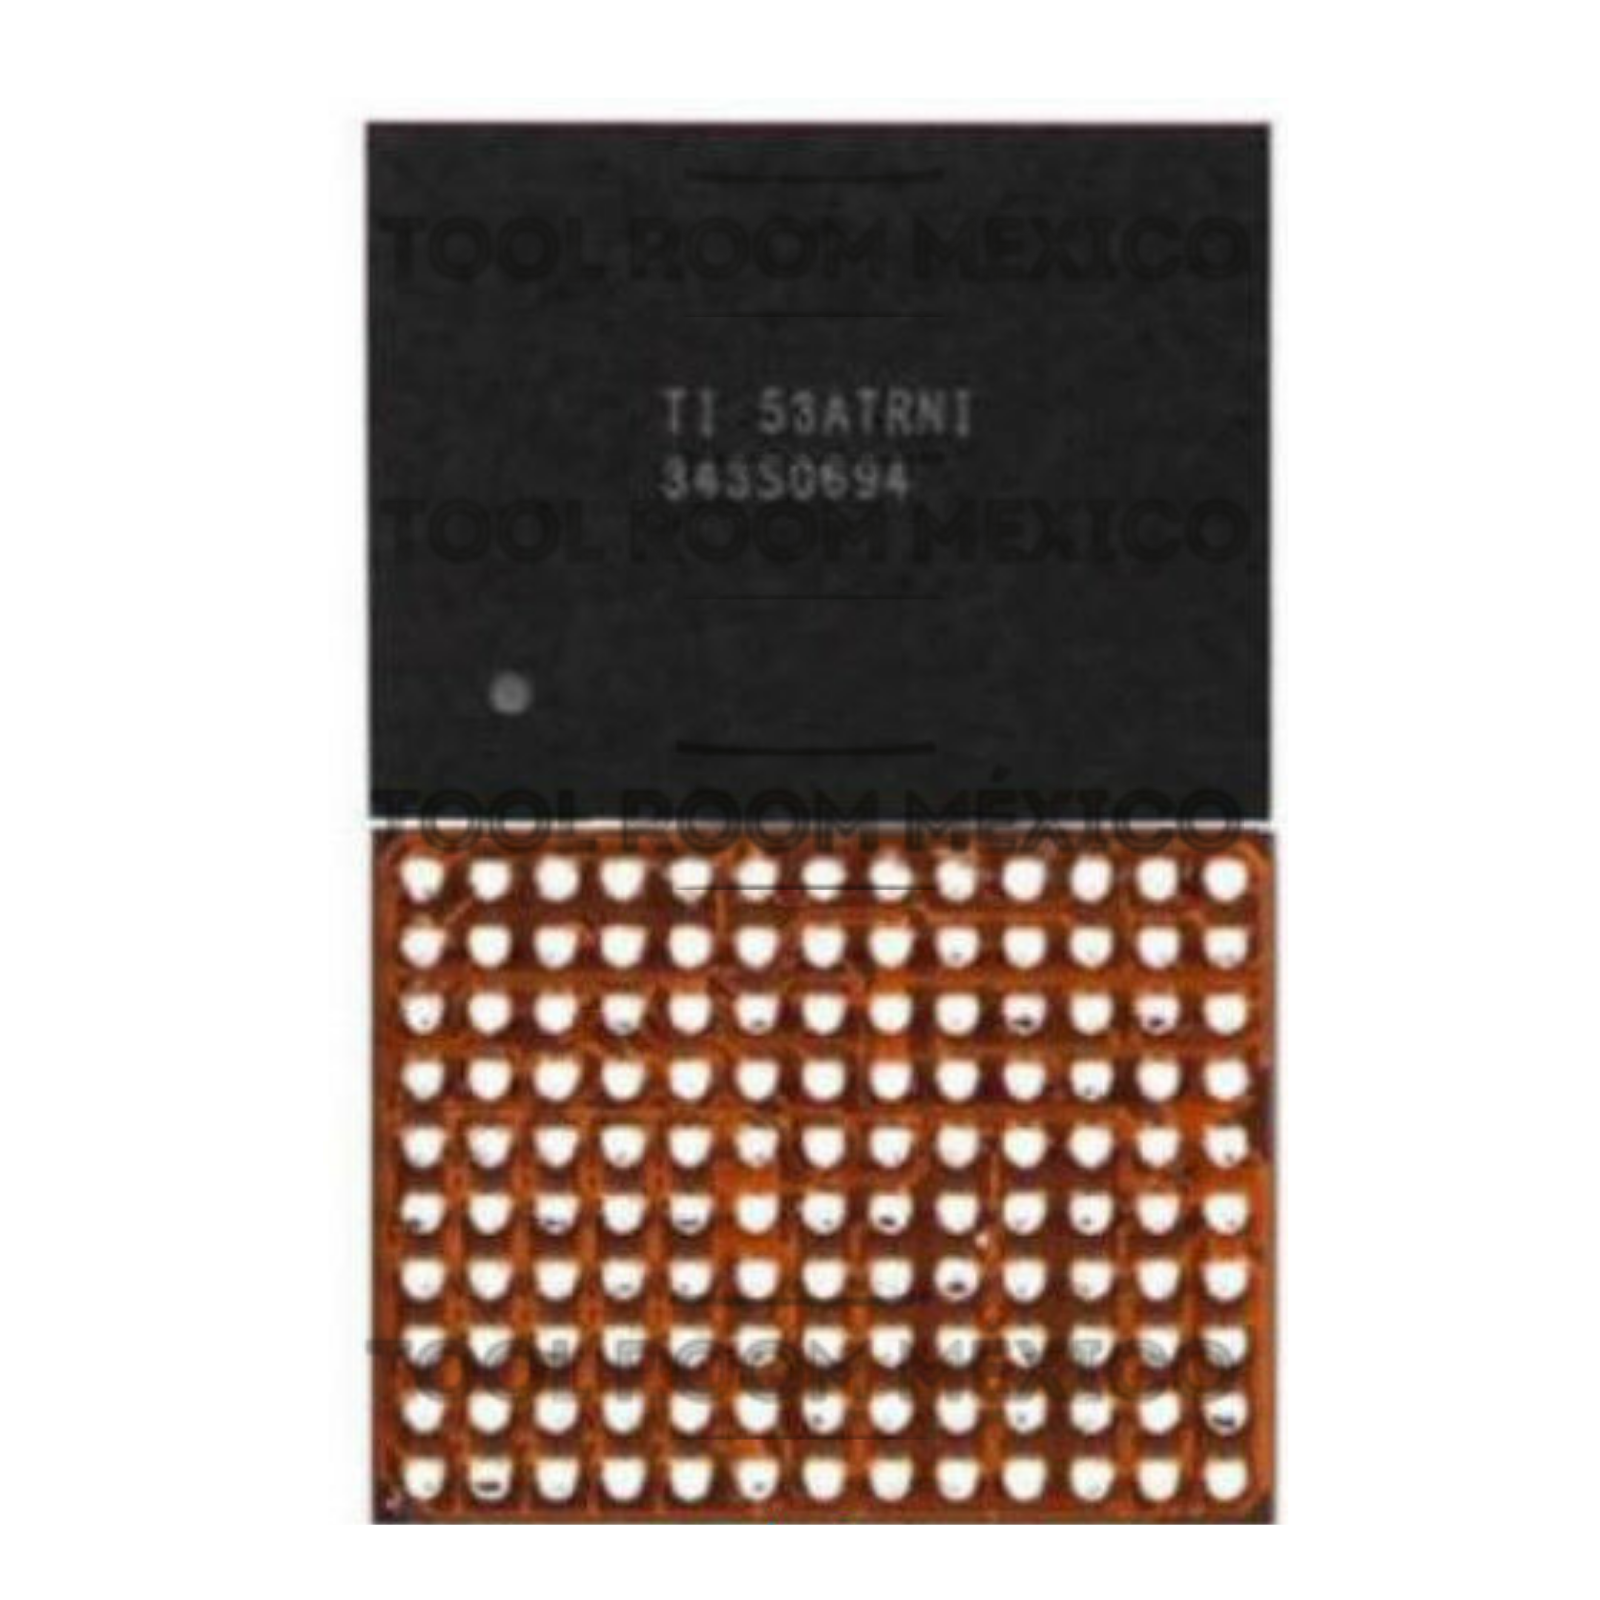 343S0645 U15 IC Touch iPhone 5S / 5C